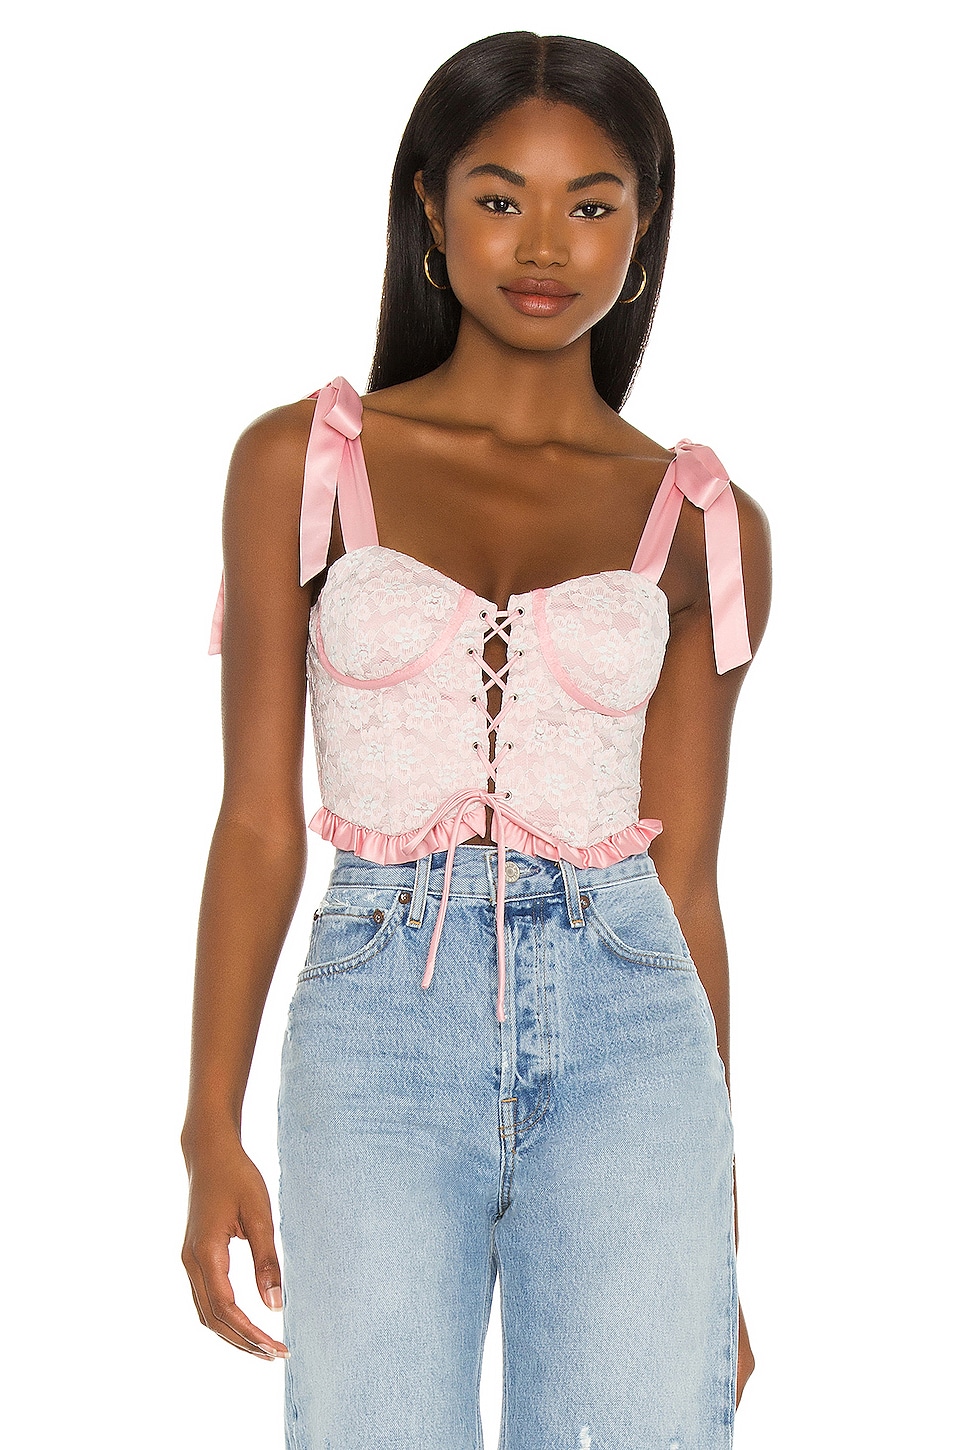 Accessorizing Your Bustier Top